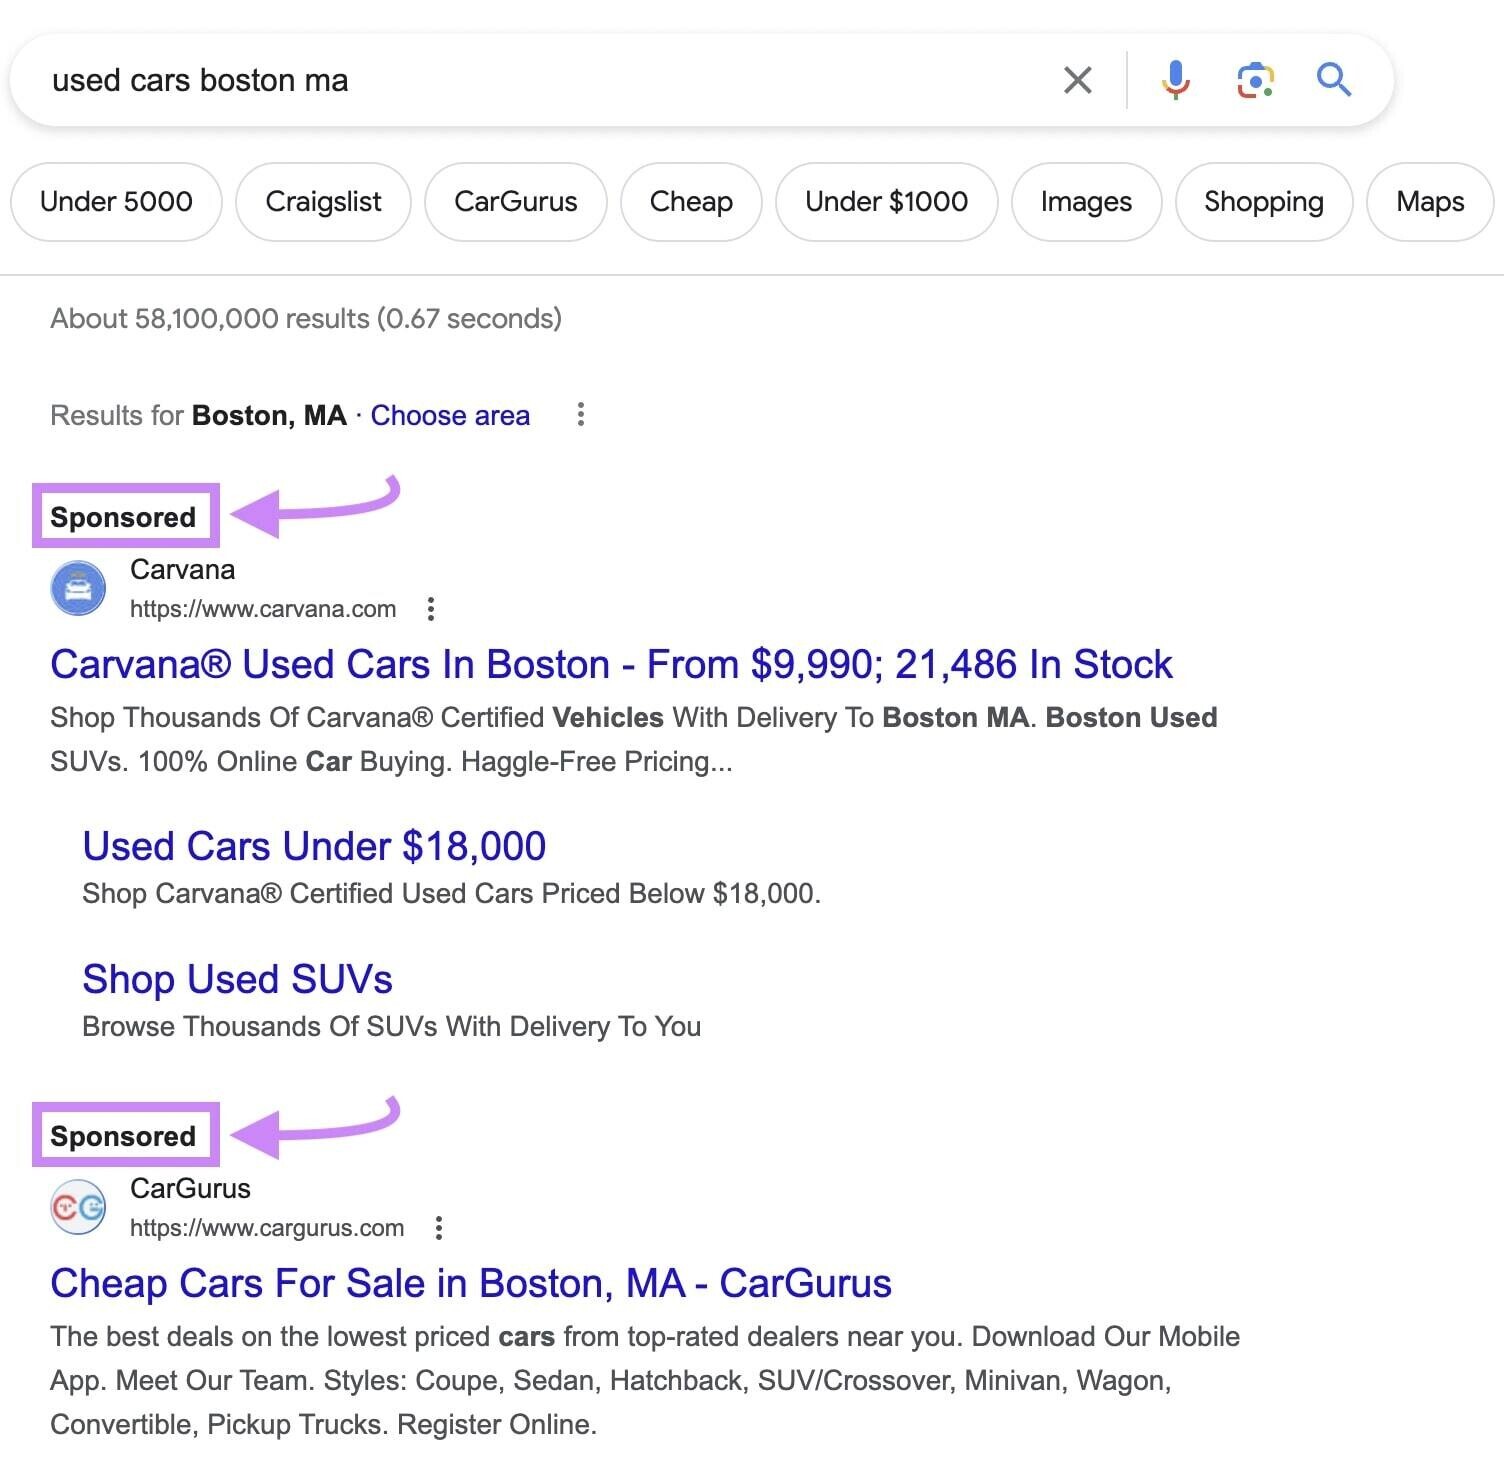 Google SERP for "used cars boston ma" with "Sponsored" results highlighted